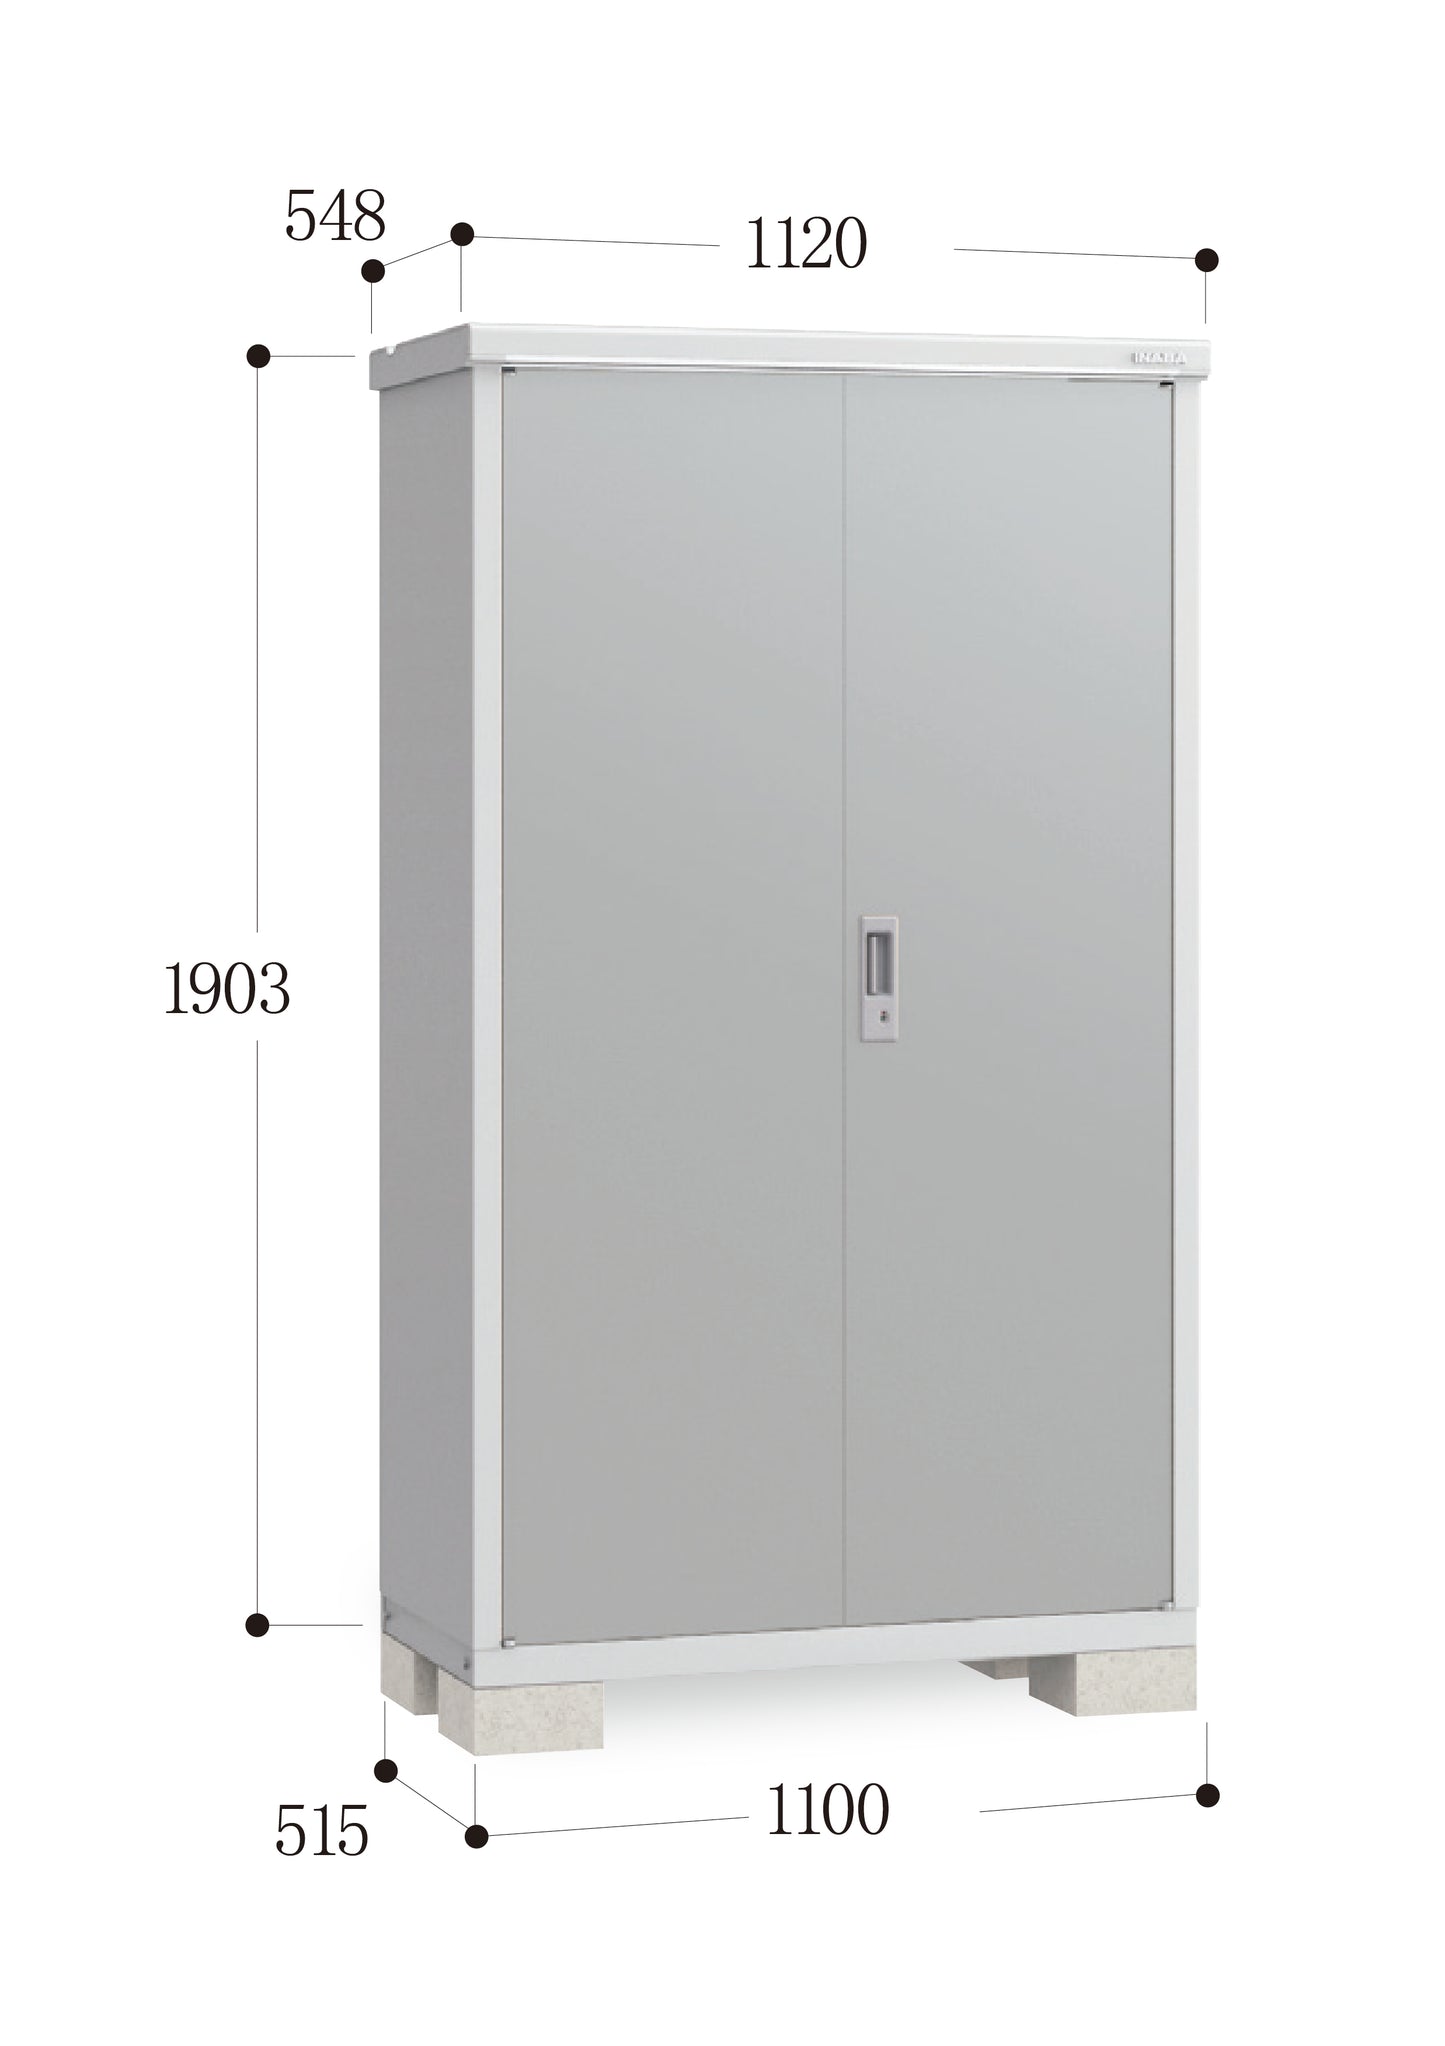 *Pre-order* Inaba Outdoor Storage BJX-115E (W1120XD548XH1903mm)1.168m3